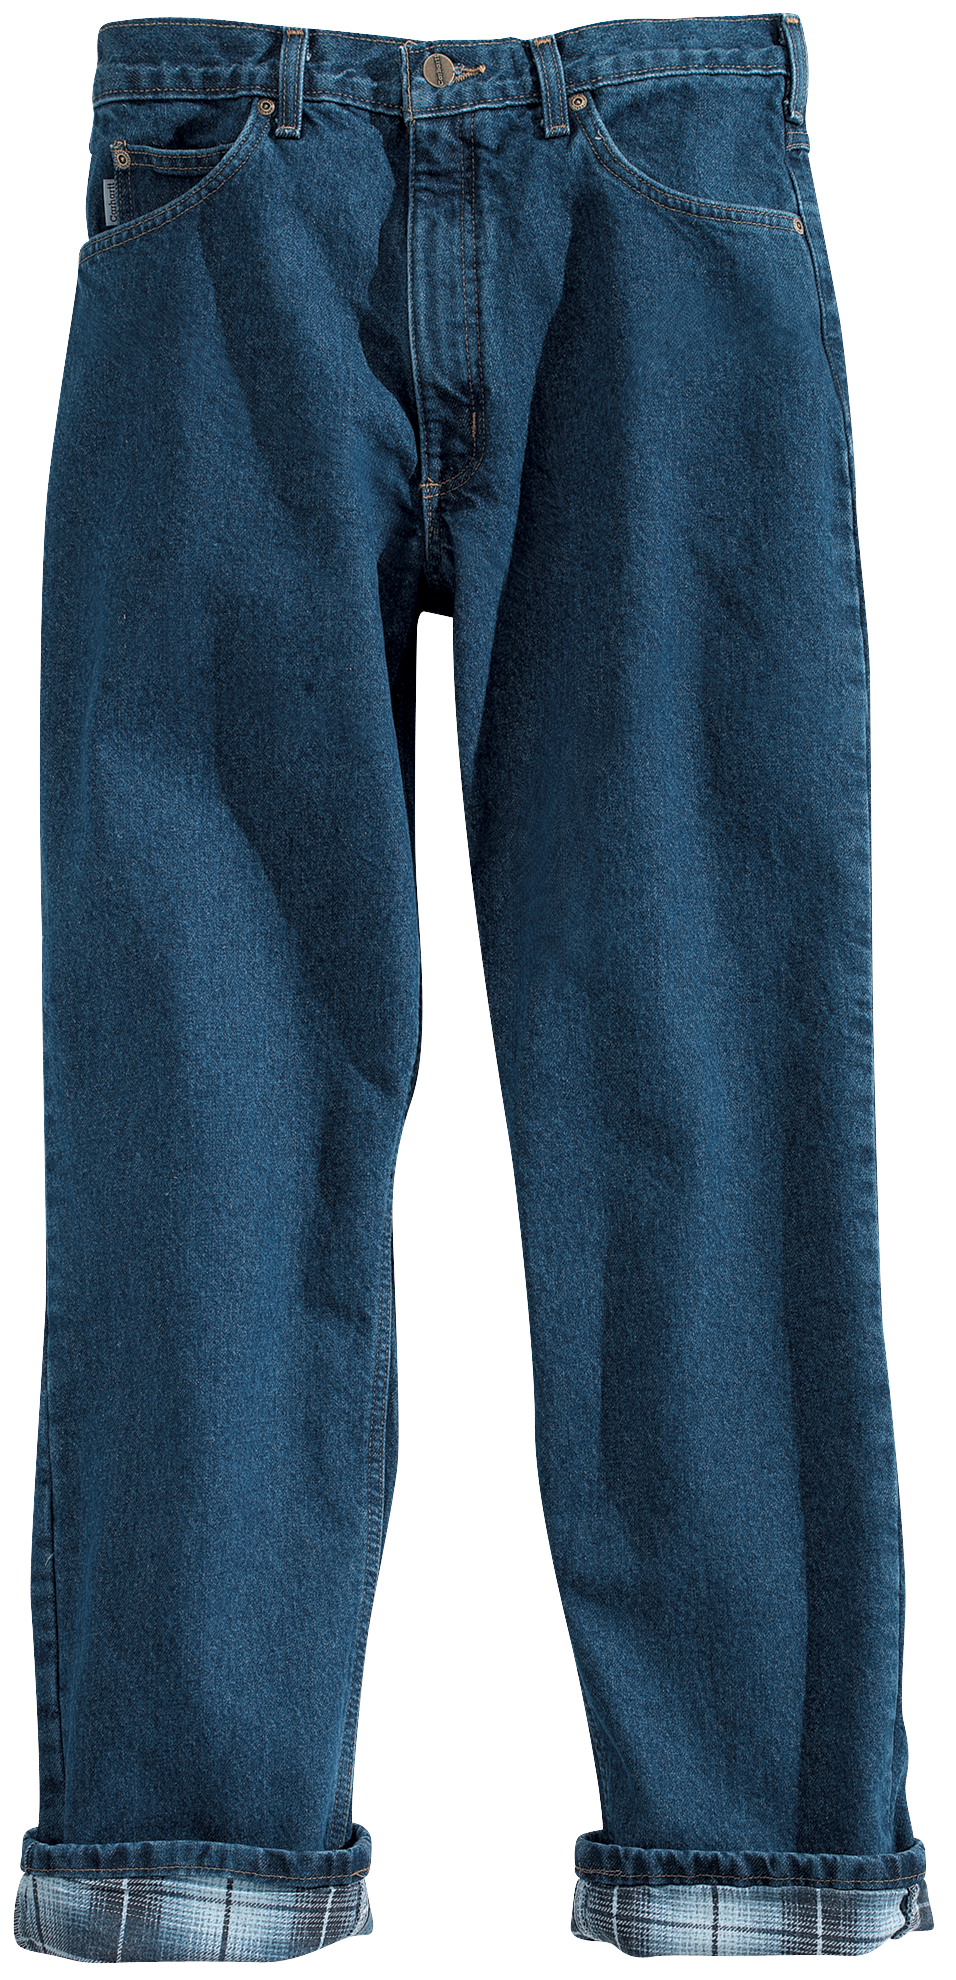 Insulated Gear Men's Carpenter Style Flannel Lined Jeans 